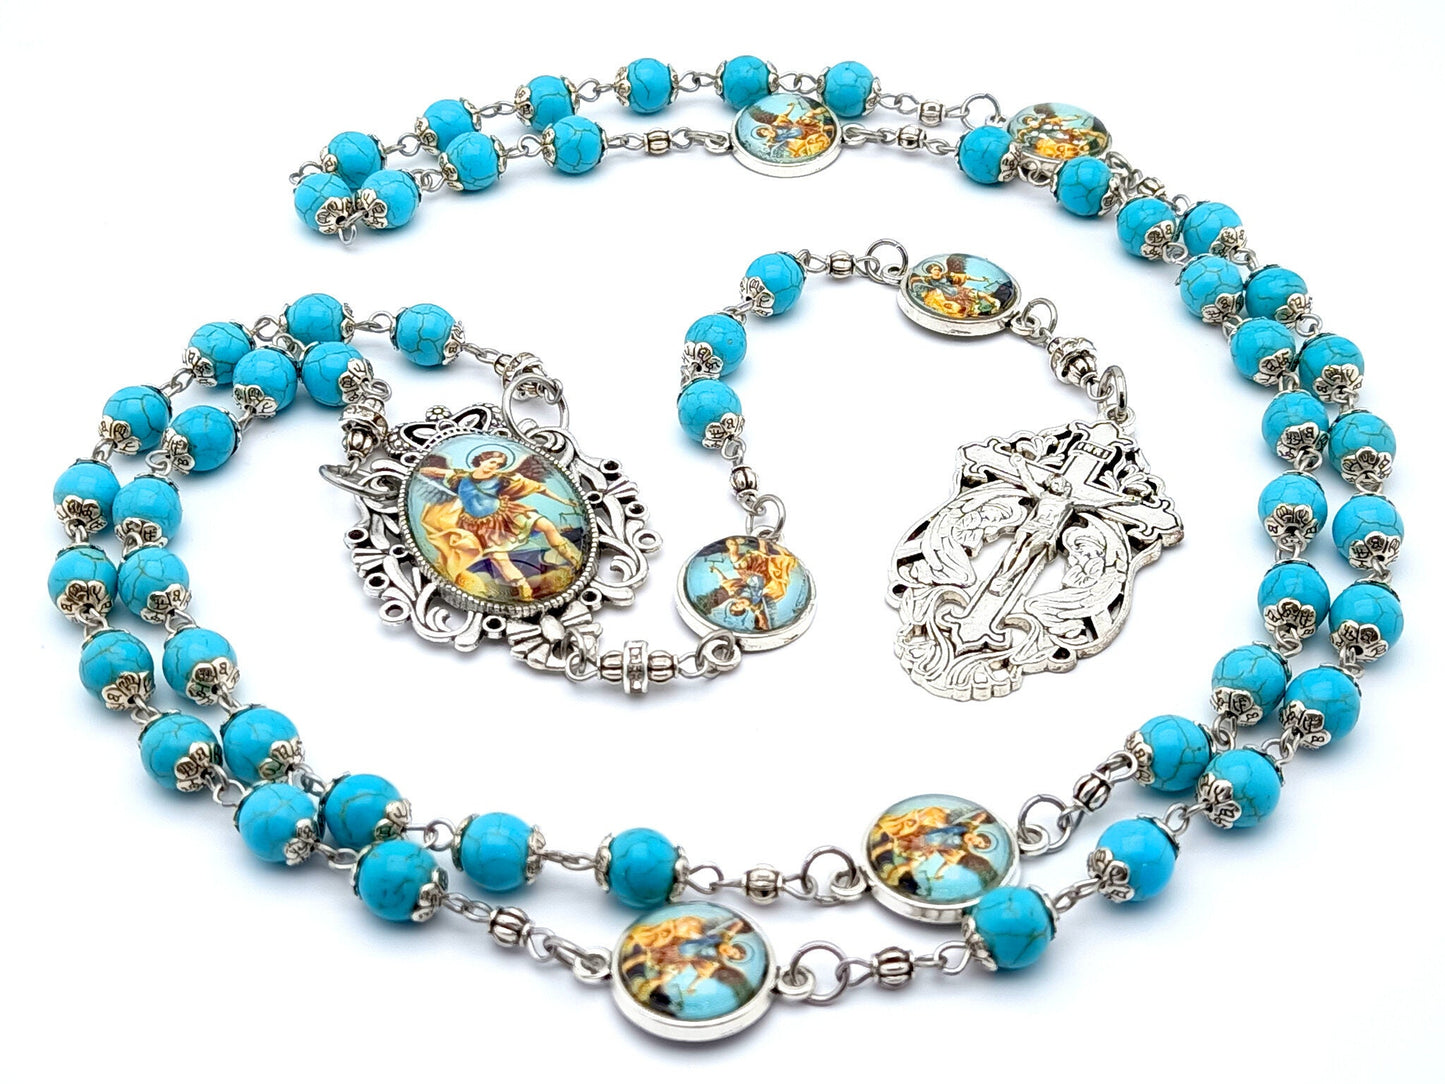 Saint Michael unique rosary beads with turquoise gemstone and stainless steel picture beads, silver Holy Angels crucifix and picture centre medal.